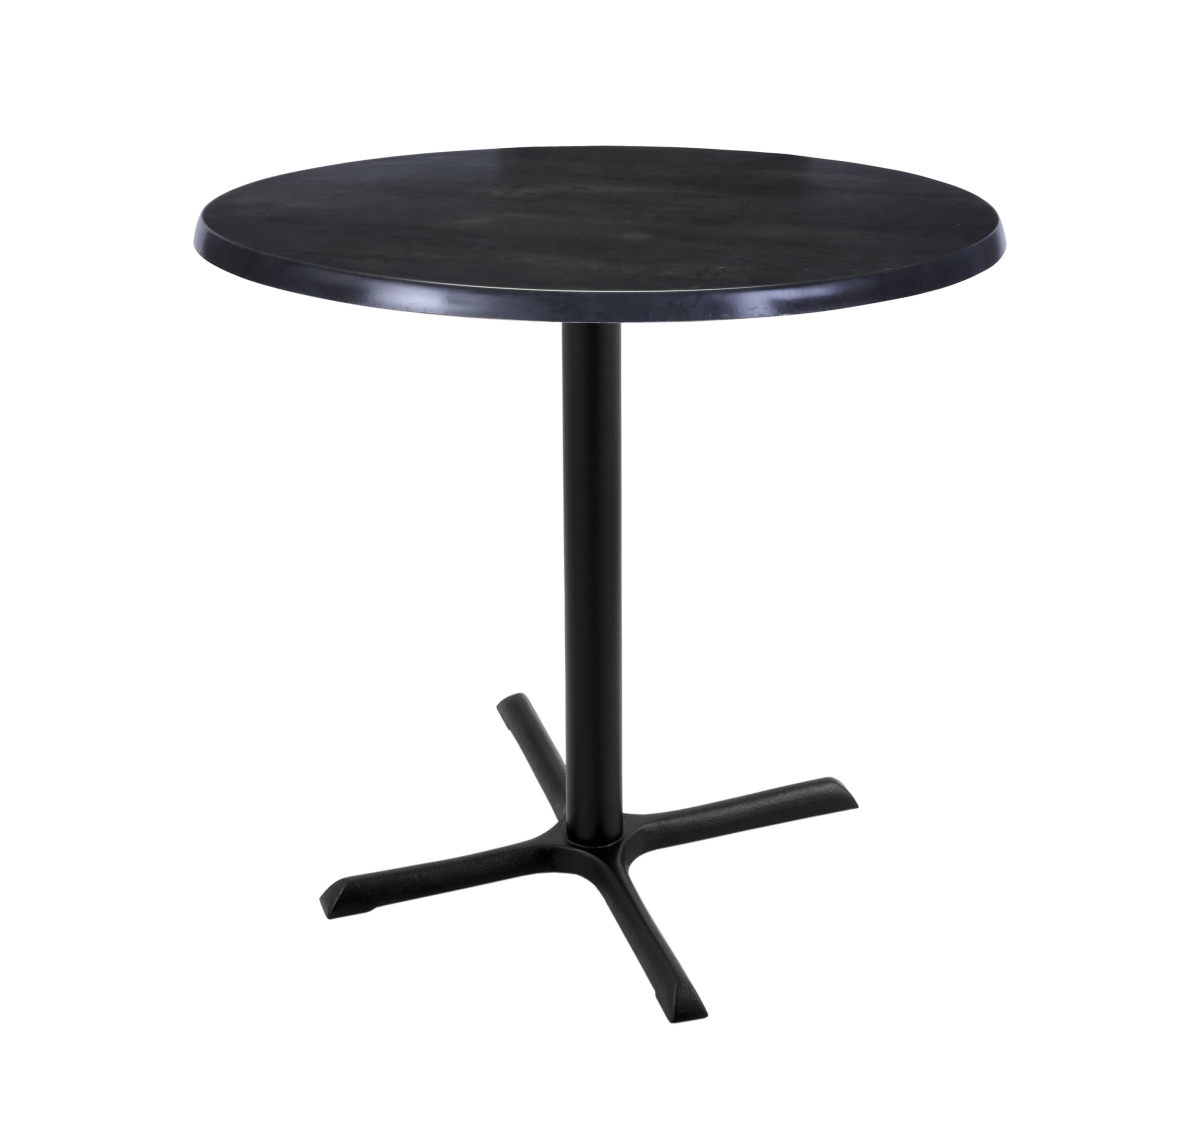 Picture of Holland Bar Stool OD211-3036BWOD30RBlkStl 36 in. Black Table with 30 in. Diameter Indoor & Outdoor Black Steel Round Top